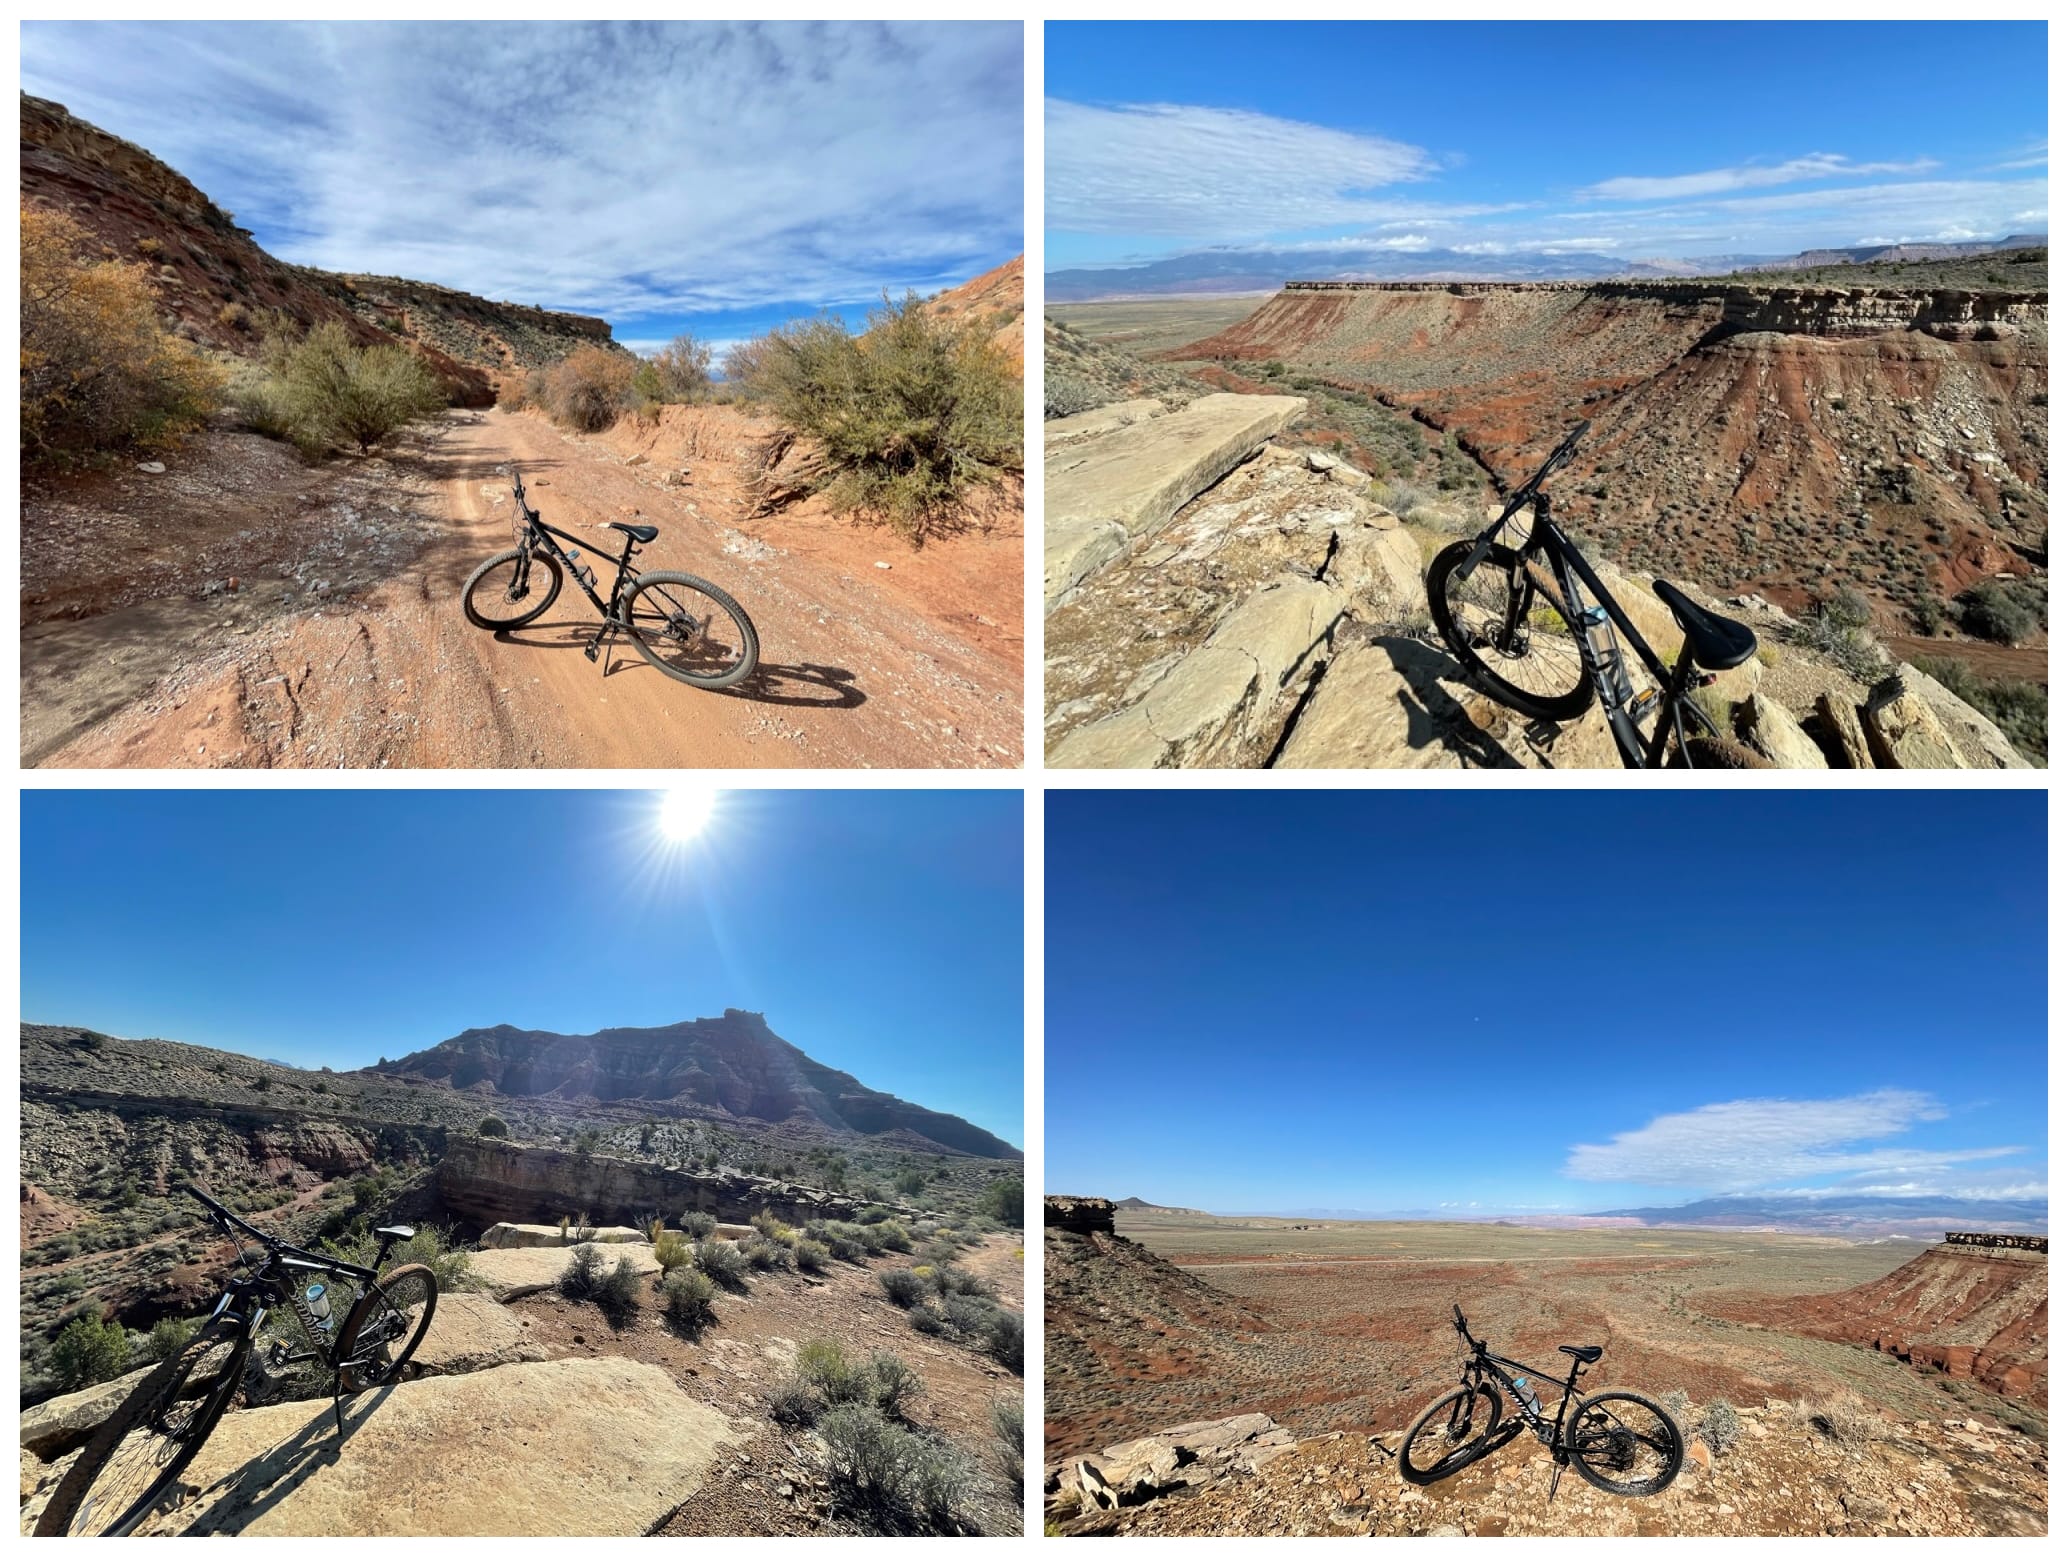 Collage of photographs showing a mountain bike on various desert trails with dirt, plateaus, and blue skies in the background.